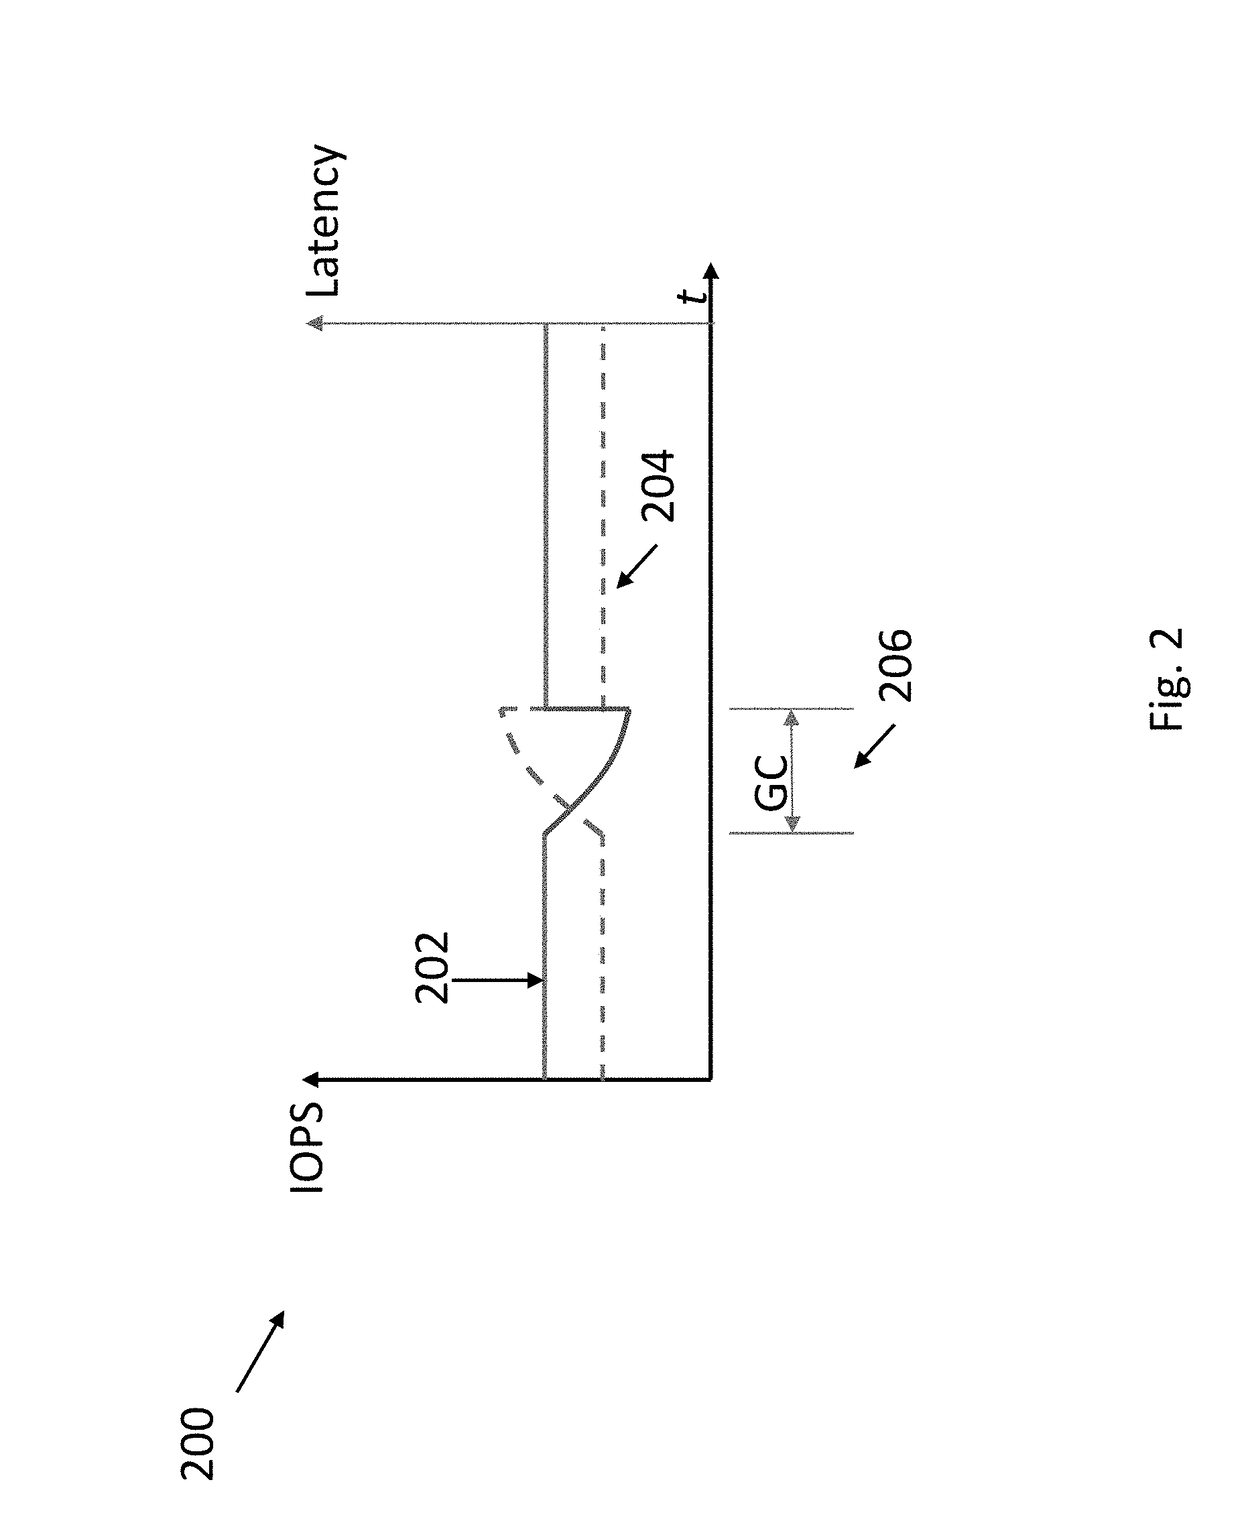 Systems and methods for suppressing latency in non-volatile solid state devices